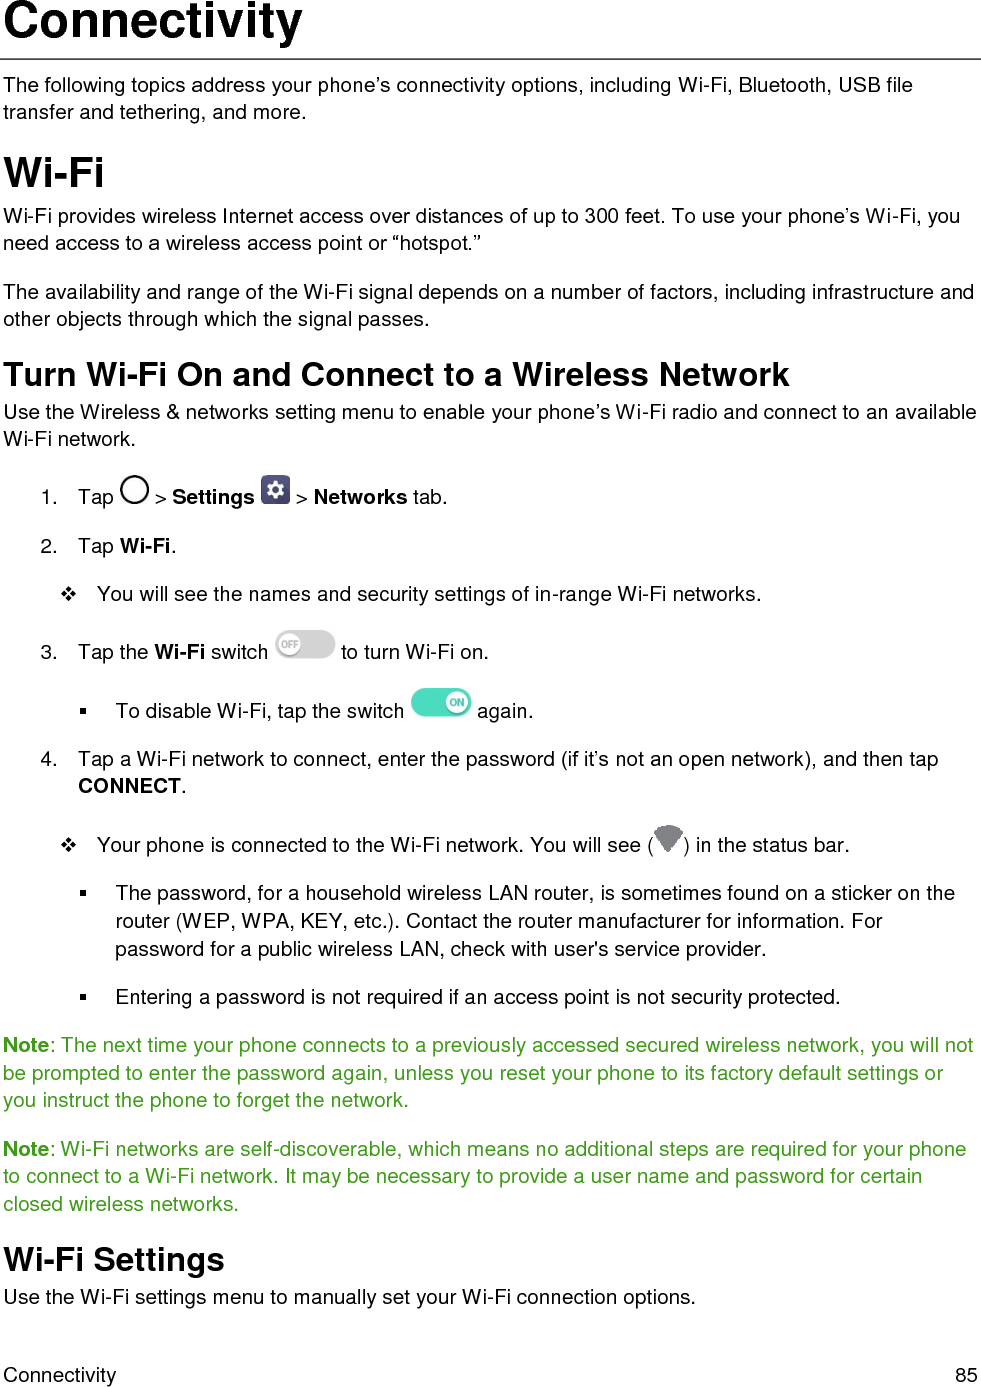  Connectivity  85 Connectivity The following topics address your phone’s connectivity options, including Wi-Fi, Bluetooth, USB file transfer and tethering, and more. Wi-Fi Wi-Fi provides wireless Internet access over distances of up to 300 feet. To use your phone’s Wi-Fi, you need access to a wireless access point or “hotspot.”  The availability and range of the Wi-Fi signal depends on a number of factors, including infrastructure and other objects through which the signal passes. Turn Wi-Fi On and Connect to a Wireless Network Use the Wireless &amp; networks setting menu to enable your phone’s Wi-Fi radio and connect to an available Wi-Fi network. 1.  Tap   &gt; Settings   &gt; Networks tab. 2.  Tap Wi-Fi.   You will see the names and security settings of in-range Wi-Fi networks. 3.  Tap the Wi-Fi switch   to turn Wi-Fi on.   To disable Wi-Fi, tap the switch   again. 4.  Tap a Wi-Fi network to connect, enter the password (if it’s not an open network), and then tap CONNECT.   Your phone is connected to the Wi-Fi network. You will see ( ) in the status bar.   The password, for a household wireless LAN router, is sometimes found on a sticker on the router (WEP, WPA, KEY, etc.). Contact the router manufacturer for information. For password for a public wireless LAN, check with user&apos;s service provider.   Entering a password is not required if an access point is not security protected. Note: The next time your phone connects to a previously accessed secured wireless network, you will not be prompted to enter the password again, unless you reset your phone to its factory default settings or you instruct the phone to forget the network. Note: Wi-Fi networks are self-discoverable, which means no additional steps are required for your phone to connect to a Wi-Fi network. It may be necessary to provide a user name and password for certain closed wireless networks. Wi-Fi Settings Use the Wi-Fi settings menu to manually set your Wi-Fi connection options. 